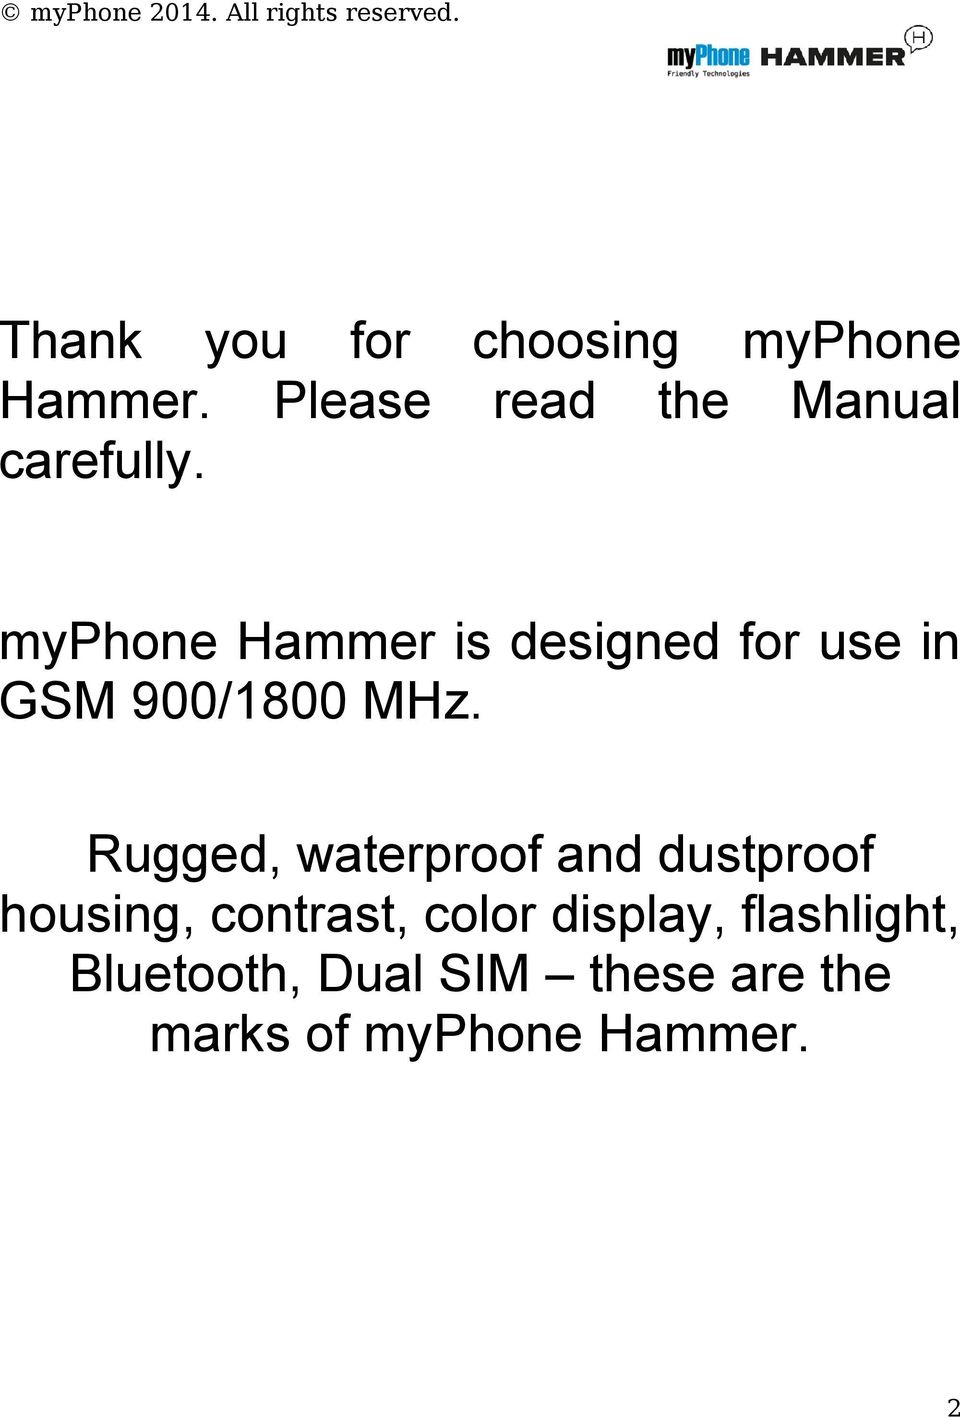 myphone Hammer is designed for use in GSM 900/1800 MHz.